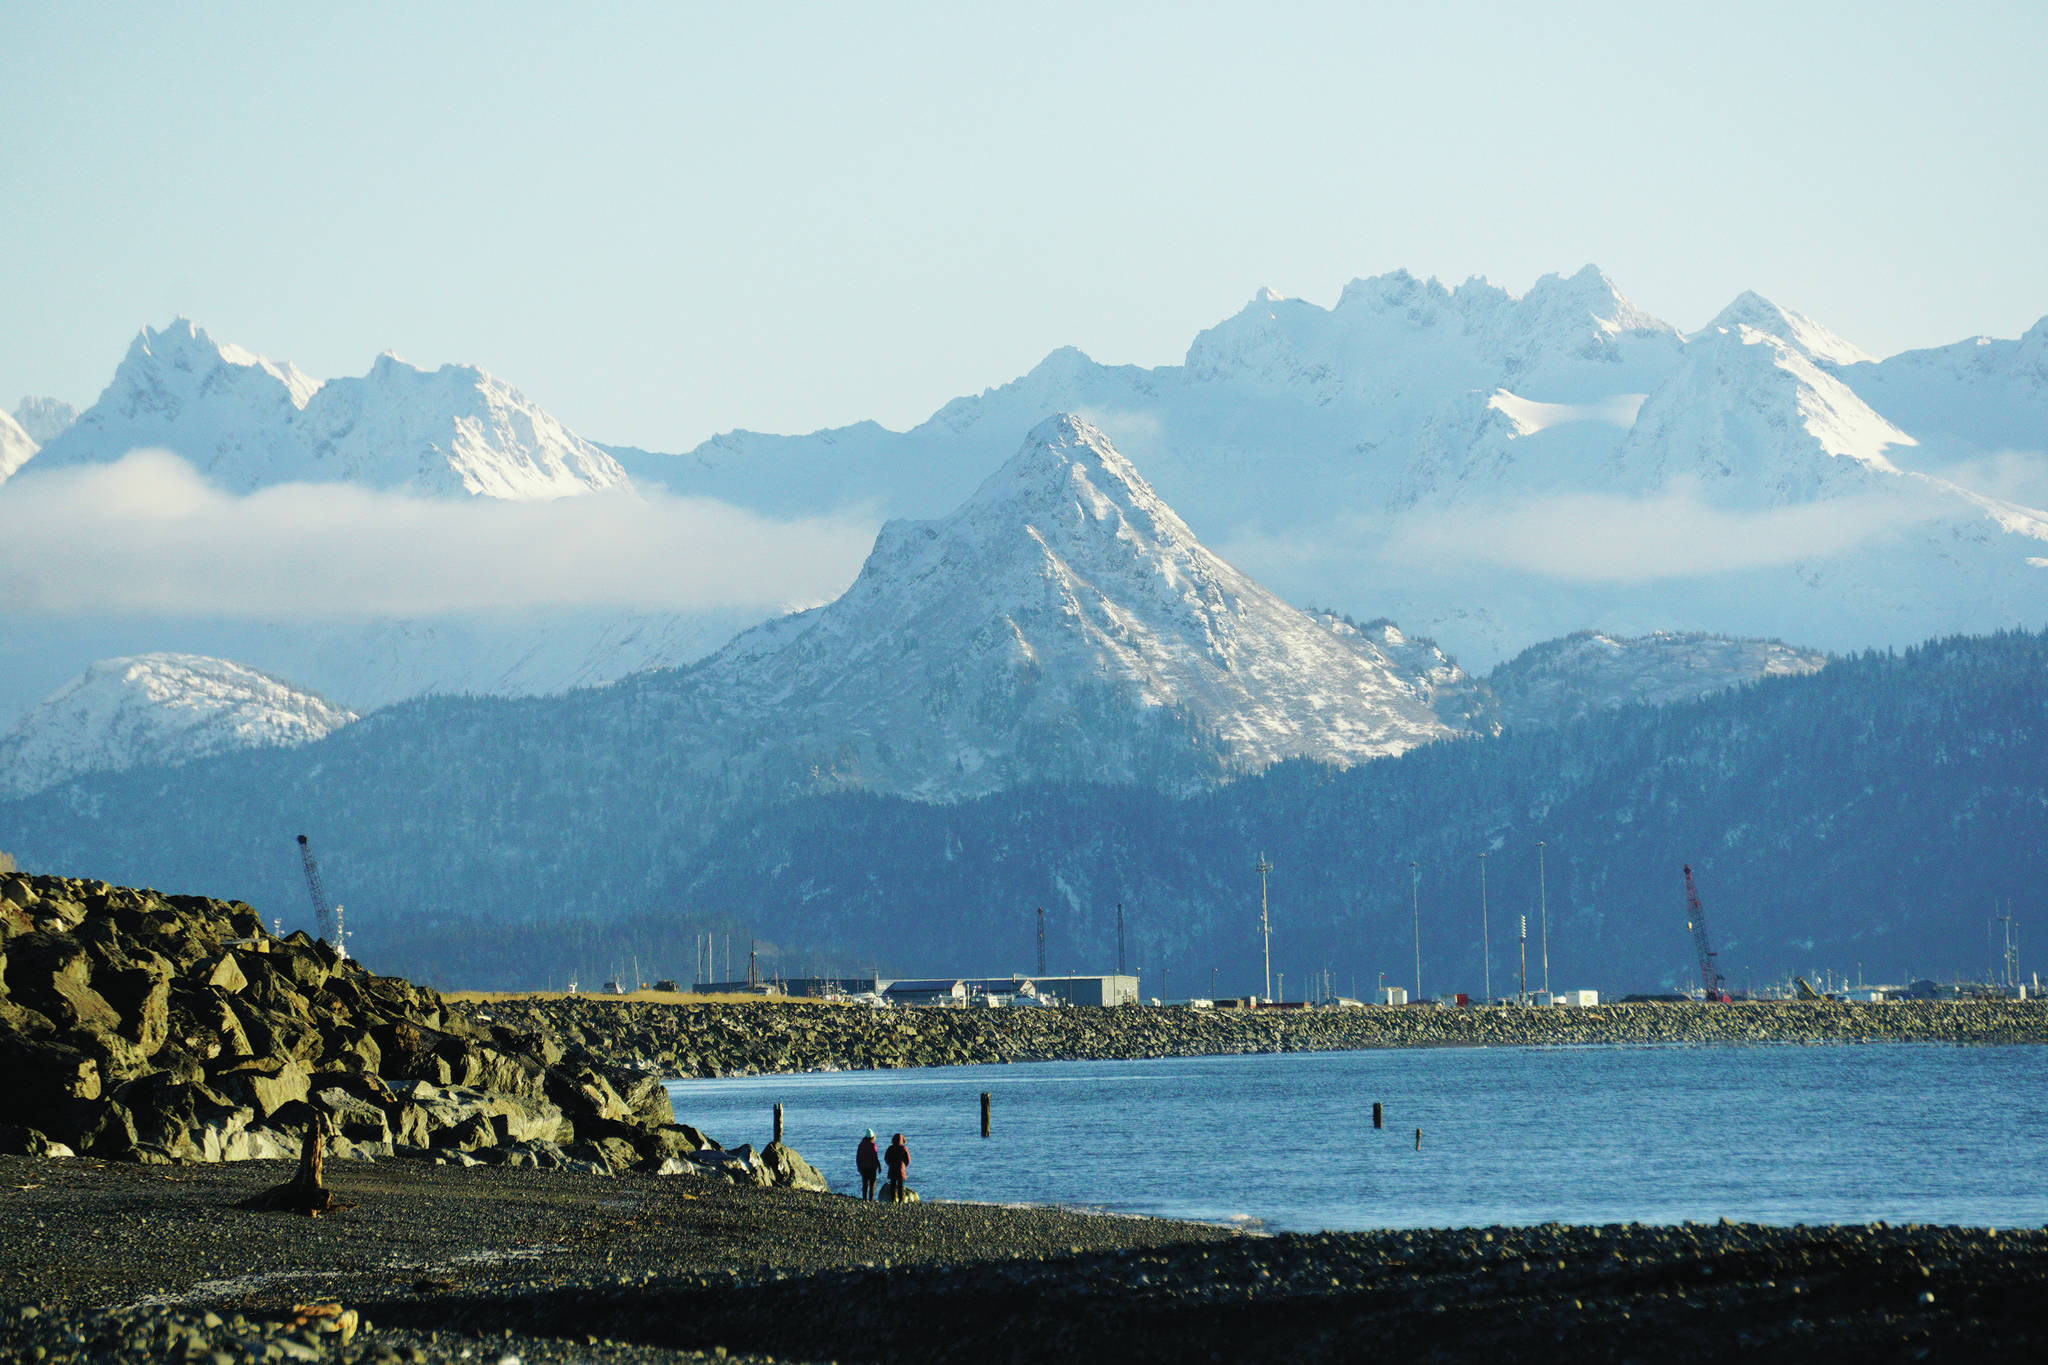 Although snow has fallen on Poot Peak, the image of the iconic bear’s eyes and nose of the mountain remains faint, as seen here on Friday, Dec. 4, 2020, in Homer, Alaska. The mountain is named after Henry Poot, also known as “China” Poot, an Alaska Native man who hunted and fished in the area in the early 1900s. According to Marilyn Sigman’s “Entangled: People and Ecological Change in Alaska’s Kachemak Bay,” Poot was the son of a Native woman and a Chinese cannery worker. (Photo by Michael Armstrong/Homer News)